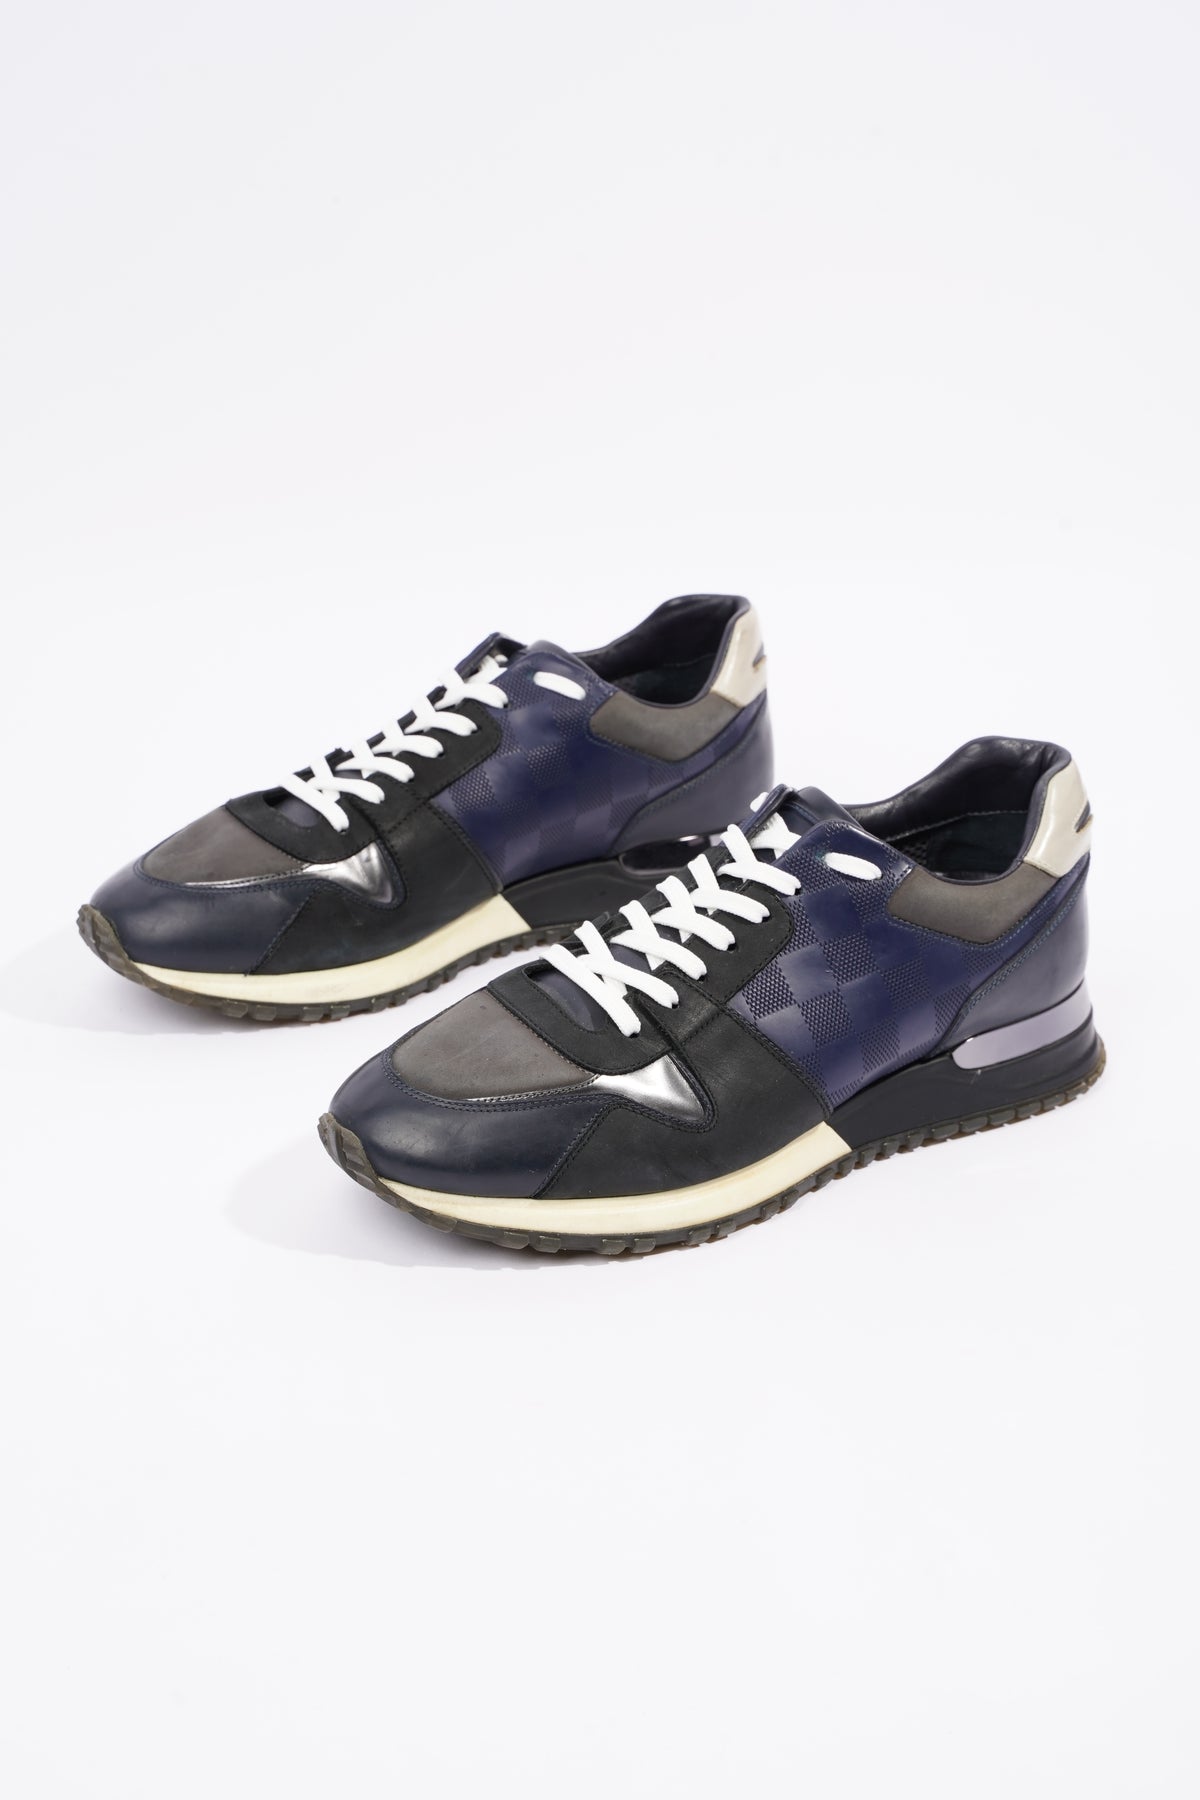 Louis Vuitton Blue/Black Nubuck and Leather Run Away Lace Up Sneakers Size  41 at 1stDibs  louis vuitton run away sneaker blue, black and blue louis  vuitton shoes, blue and black louis